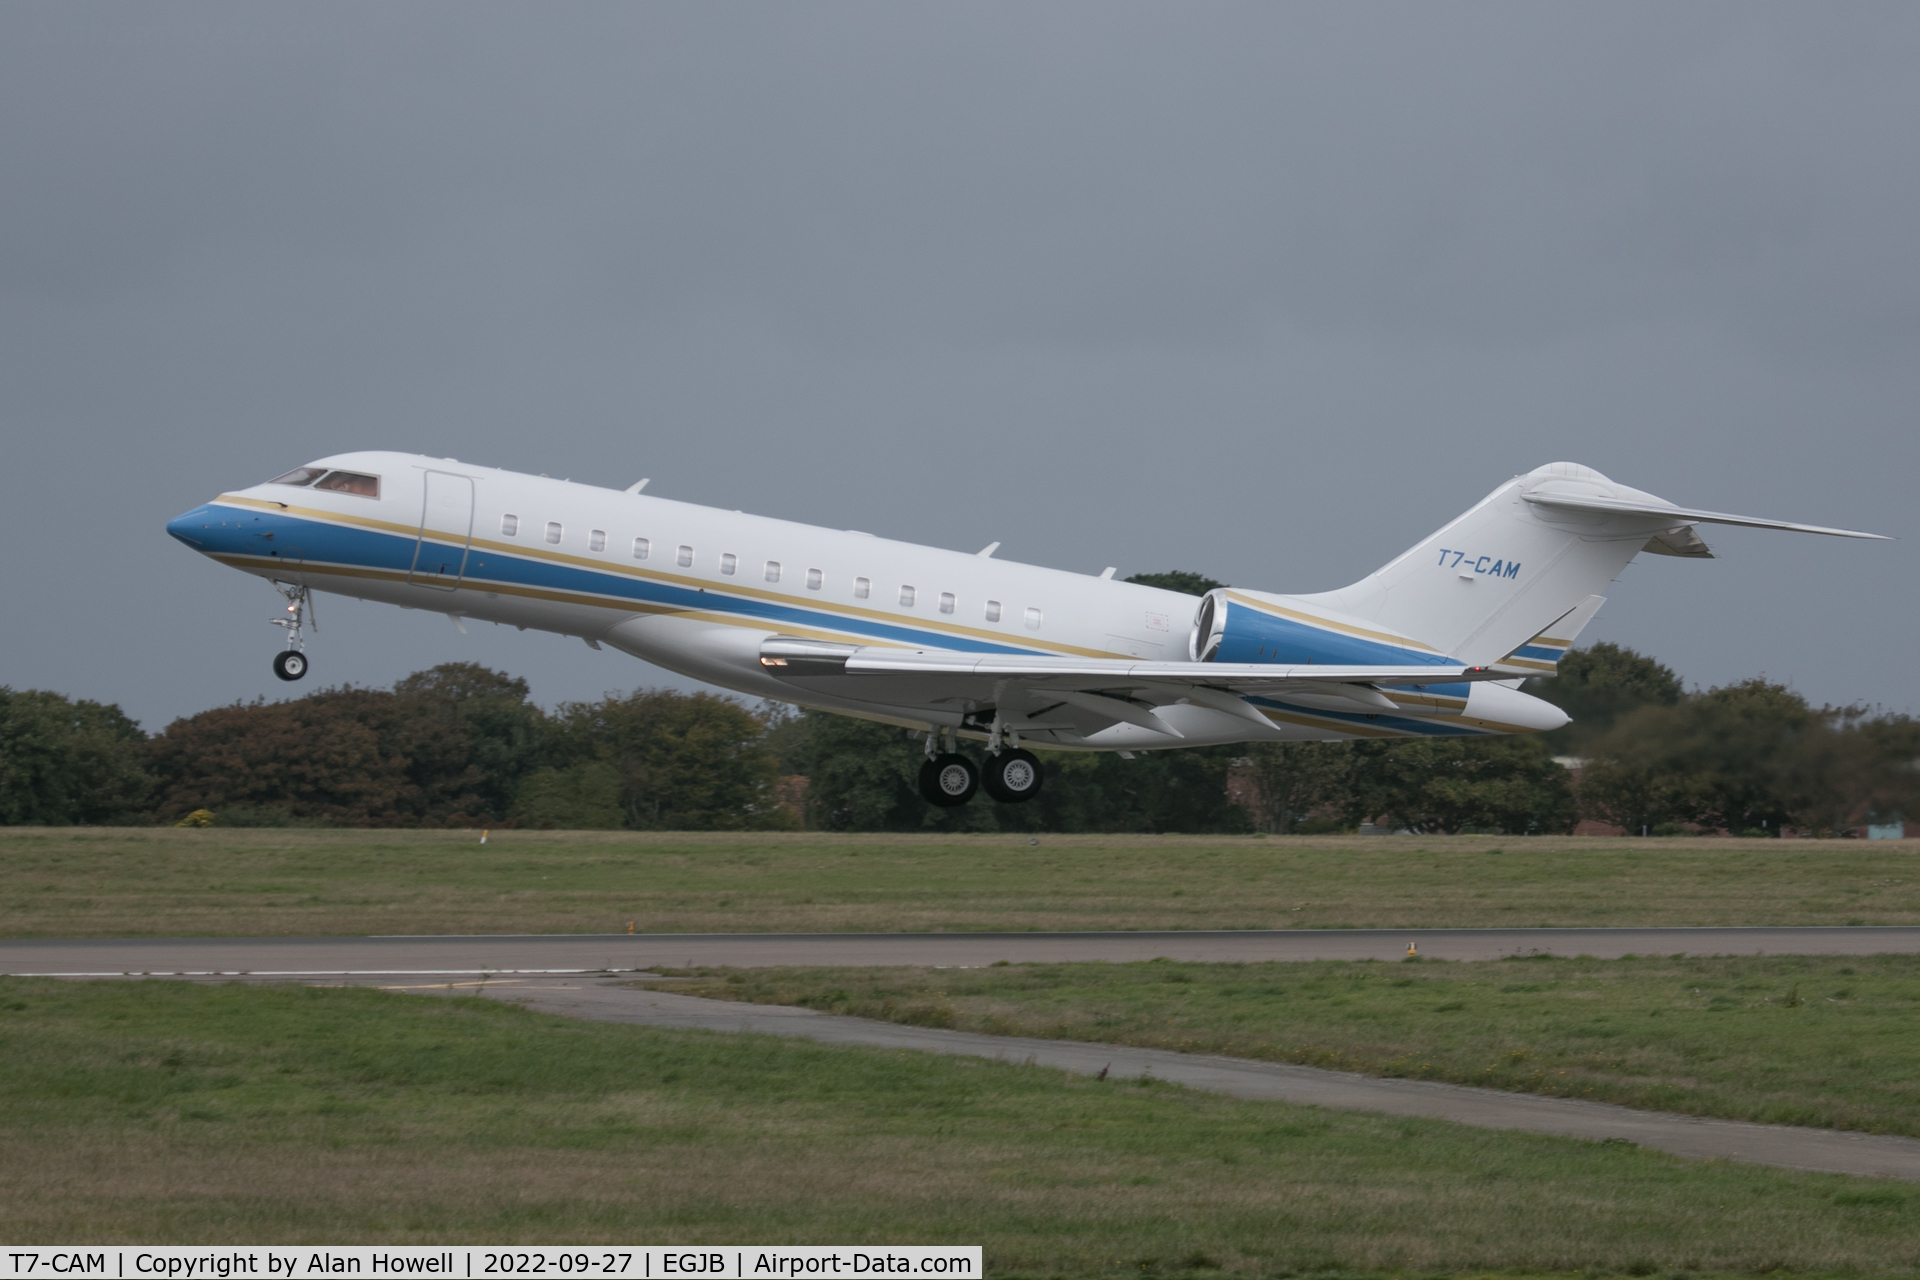 T7-CAM, 2015 Bombardier BD-700-1A10 Global 6000 C/N 9698, Departing Guernsey for Luton after a night stop